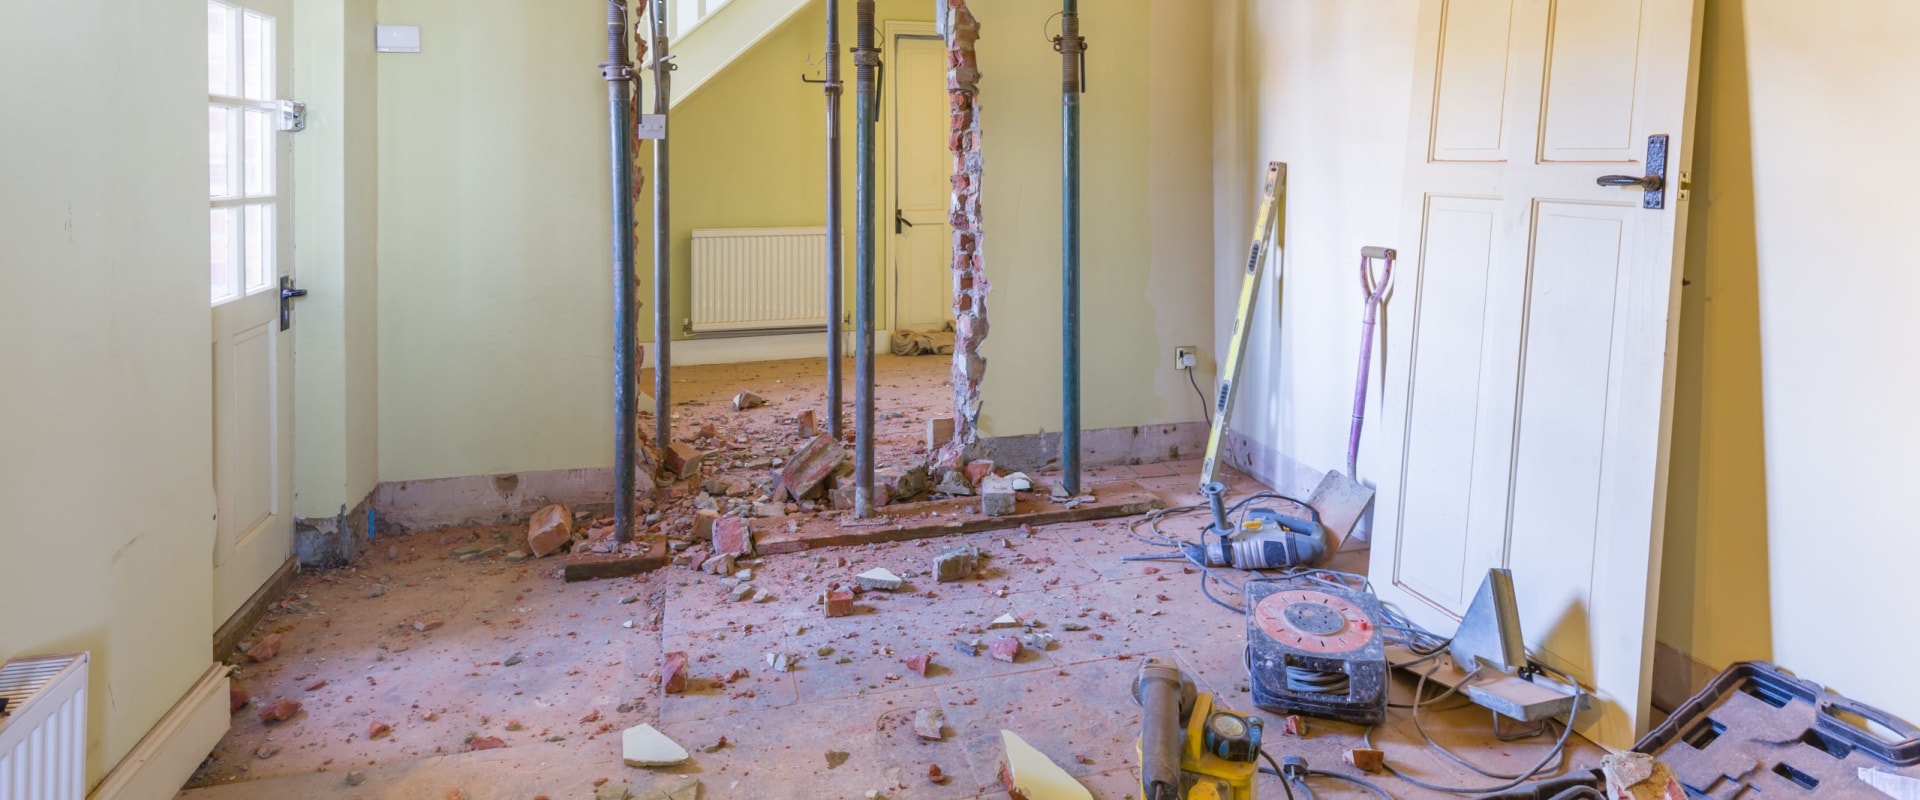 The Importance of Hiring a Structural Engineer for Removing Load-Bearing Walls